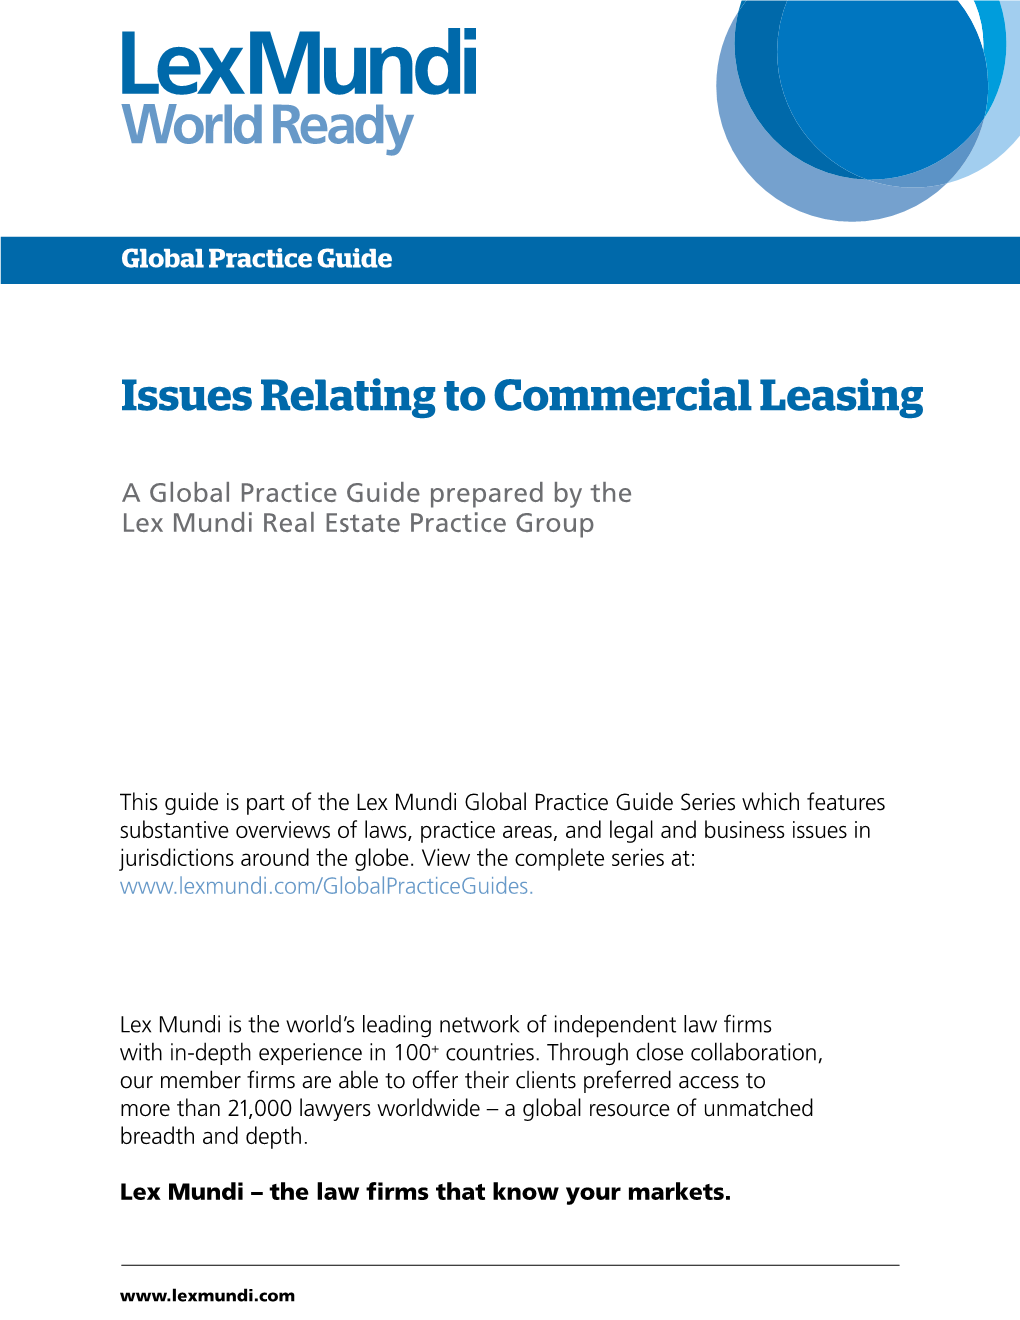 Issues Relating to Commercial Leasing